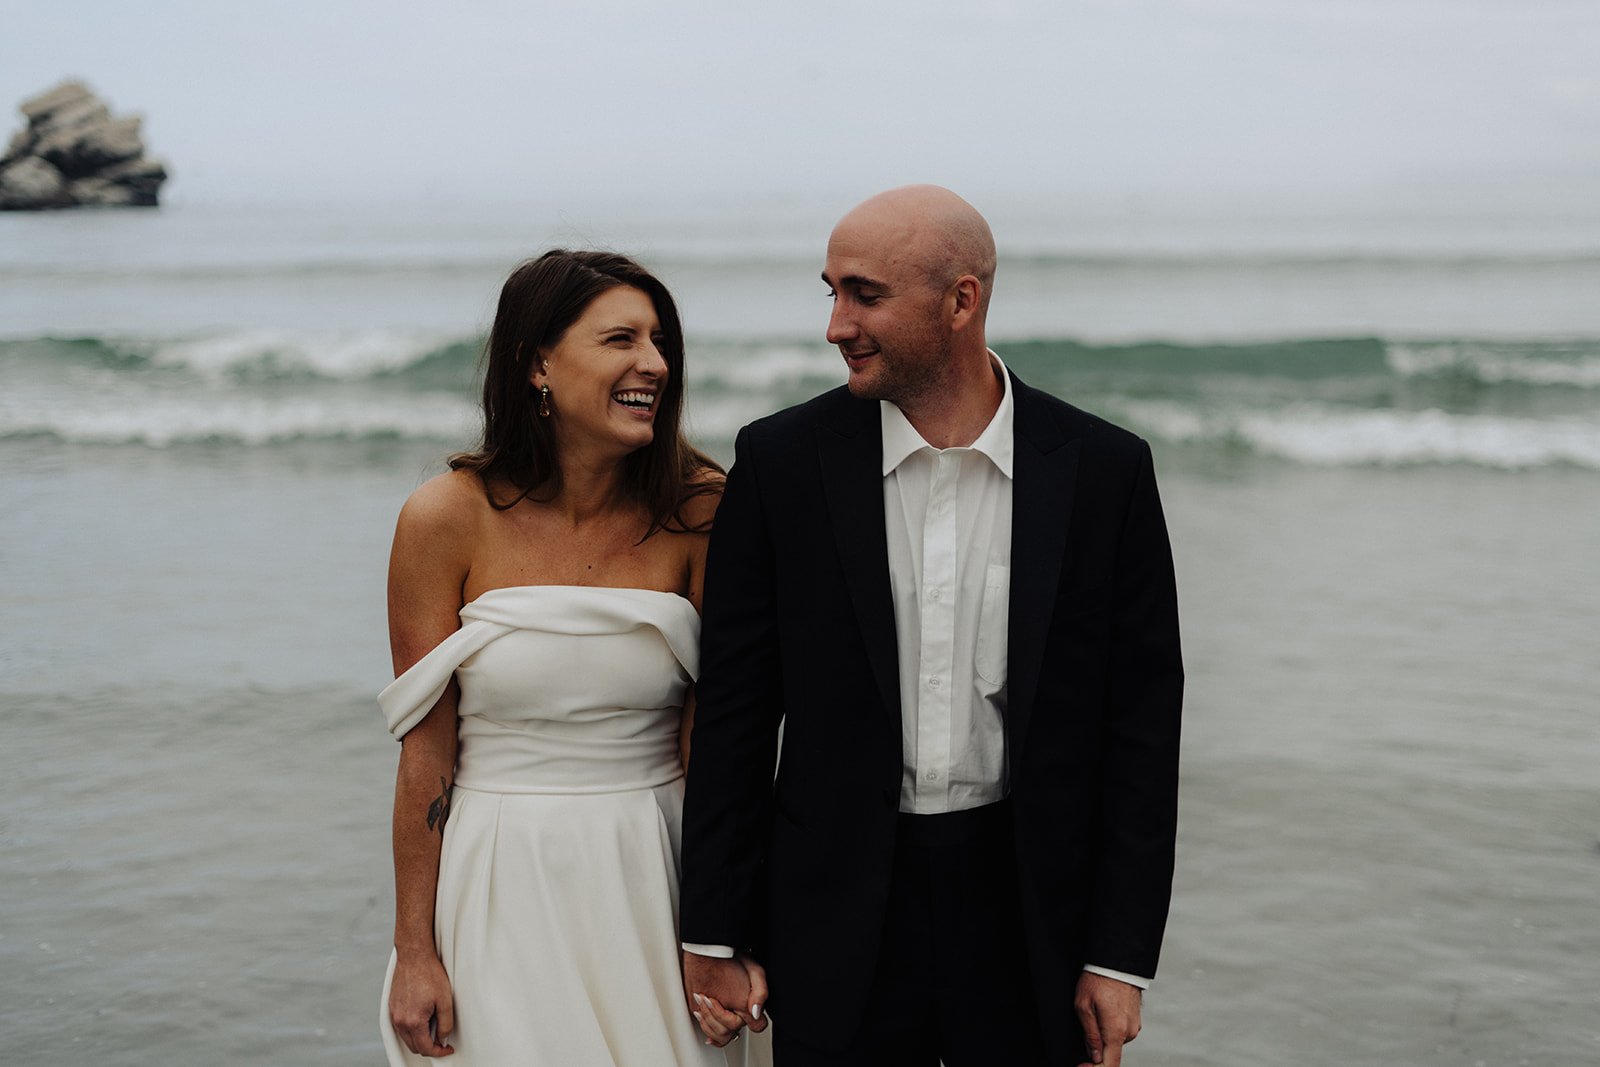 Couple laughing together as they elope in the ocean